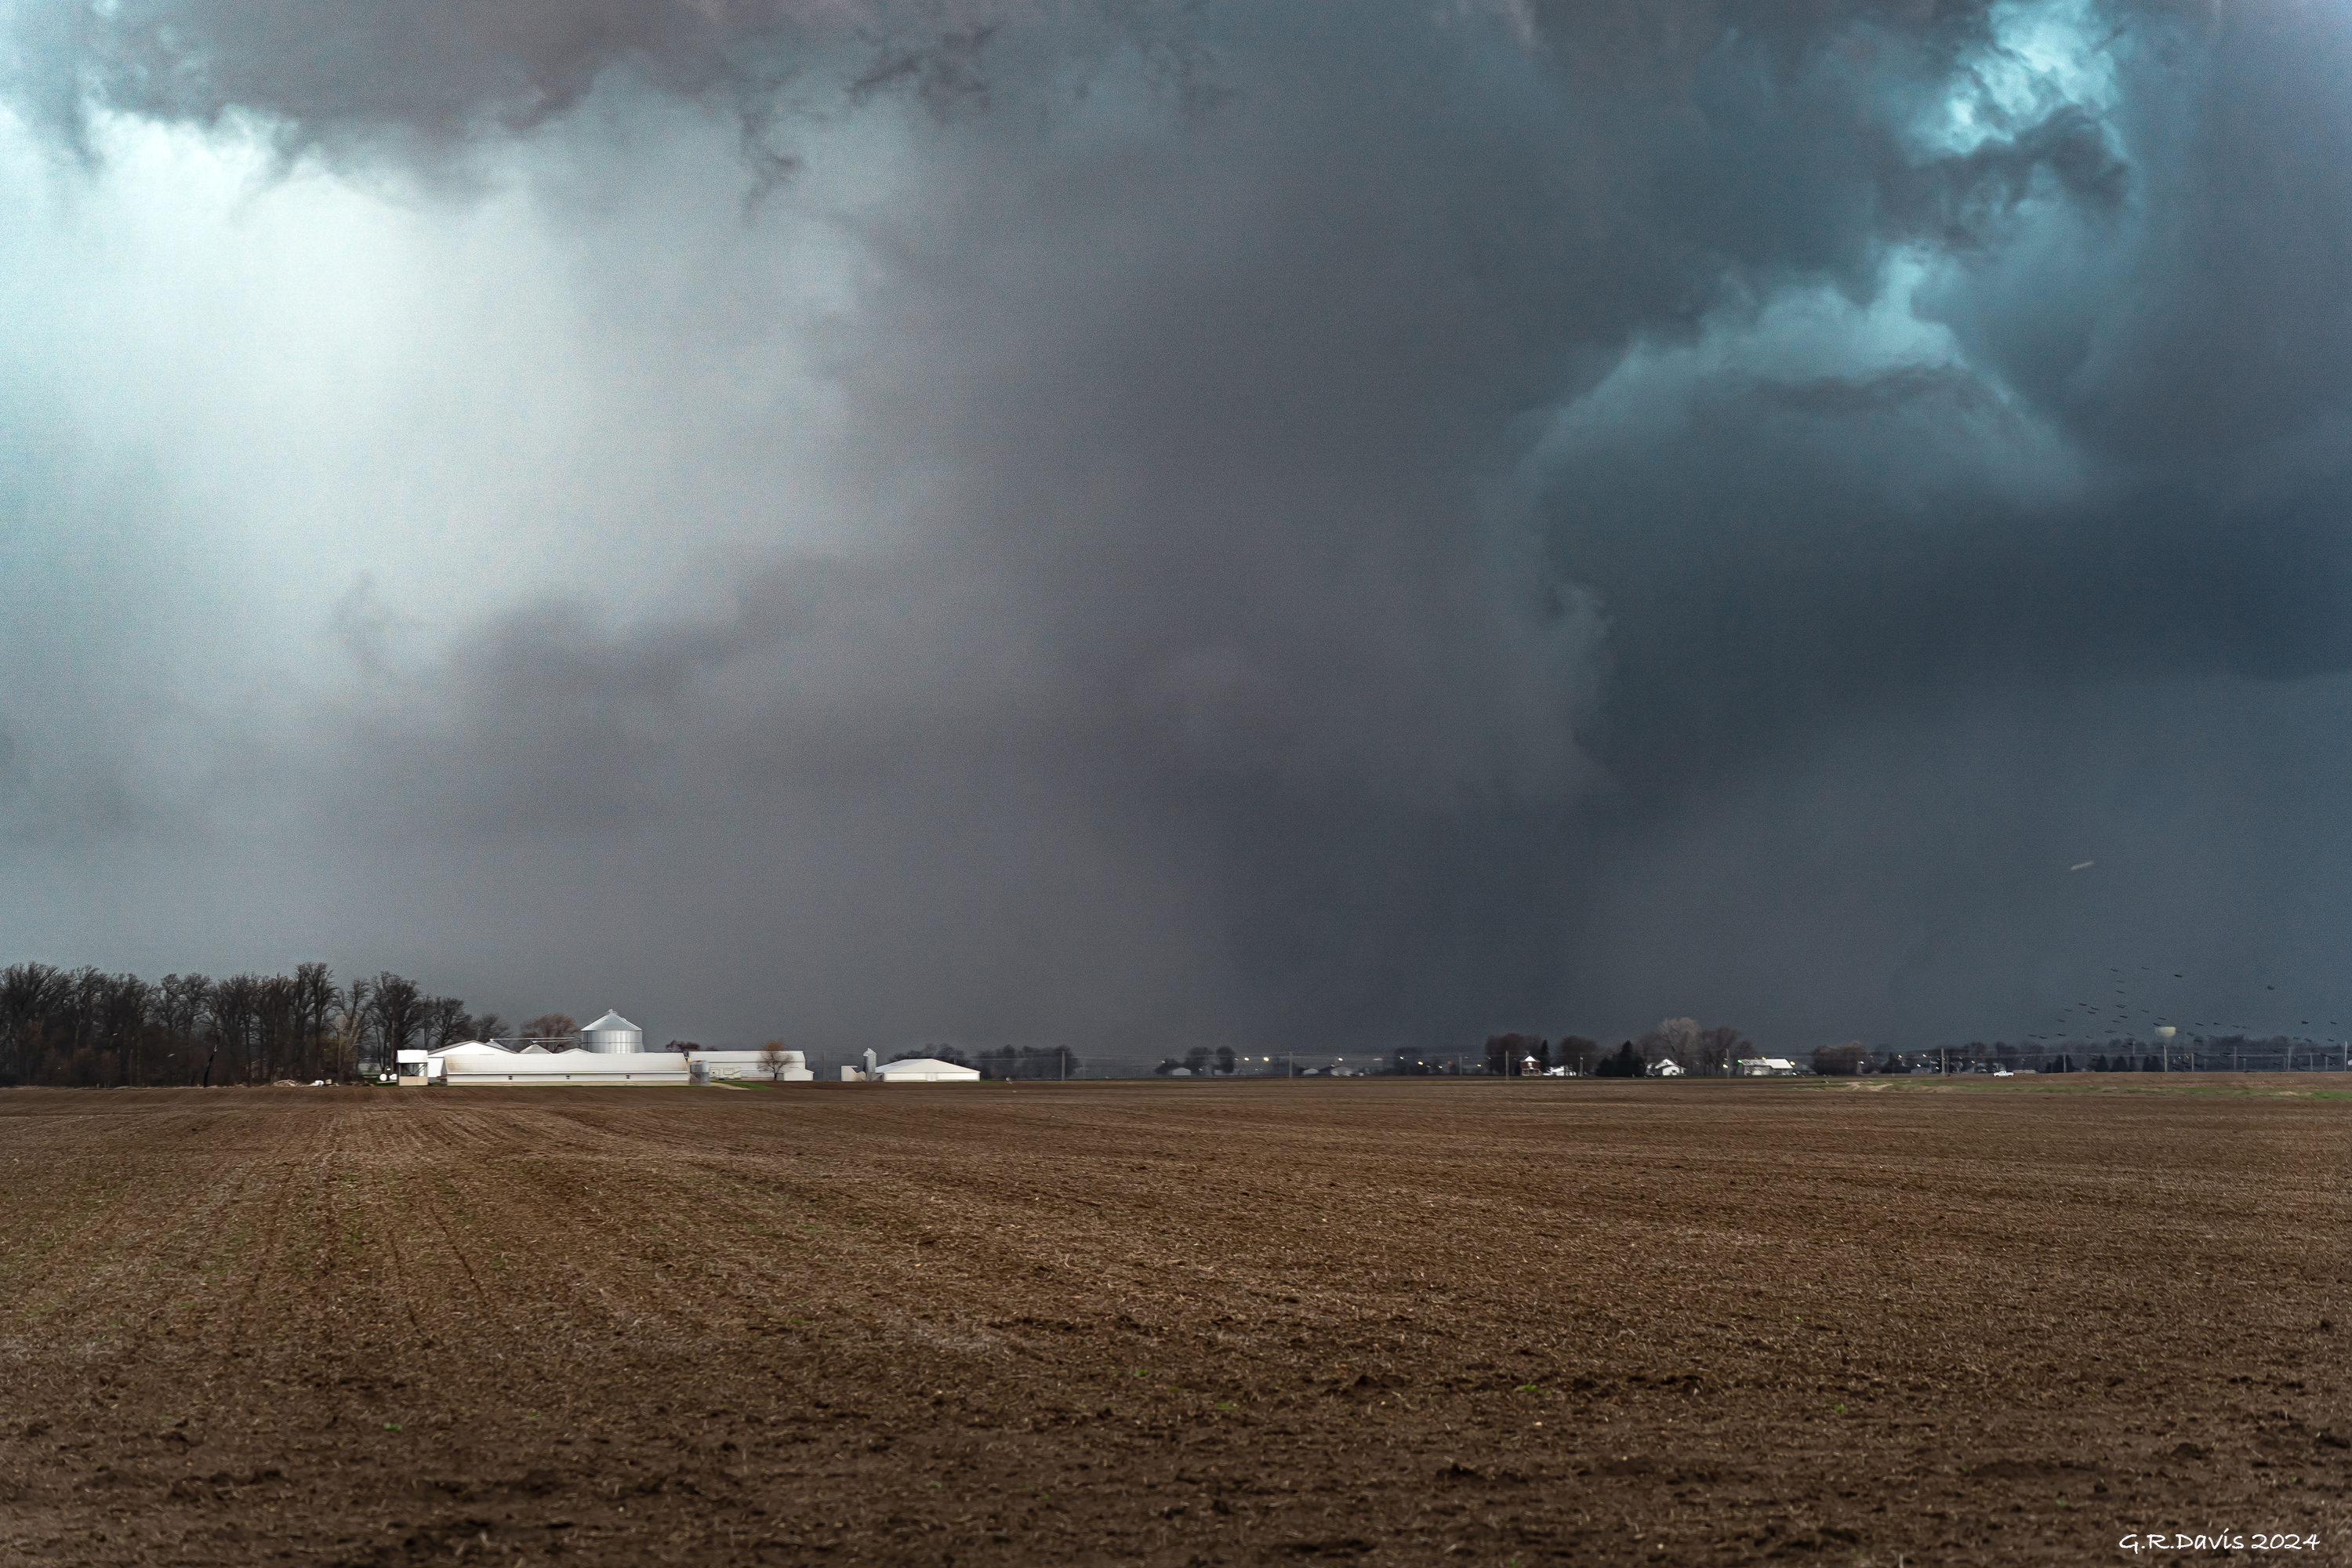 Image of an EF1 tornado that impacted Celina, Ohio on March 14, 2024.